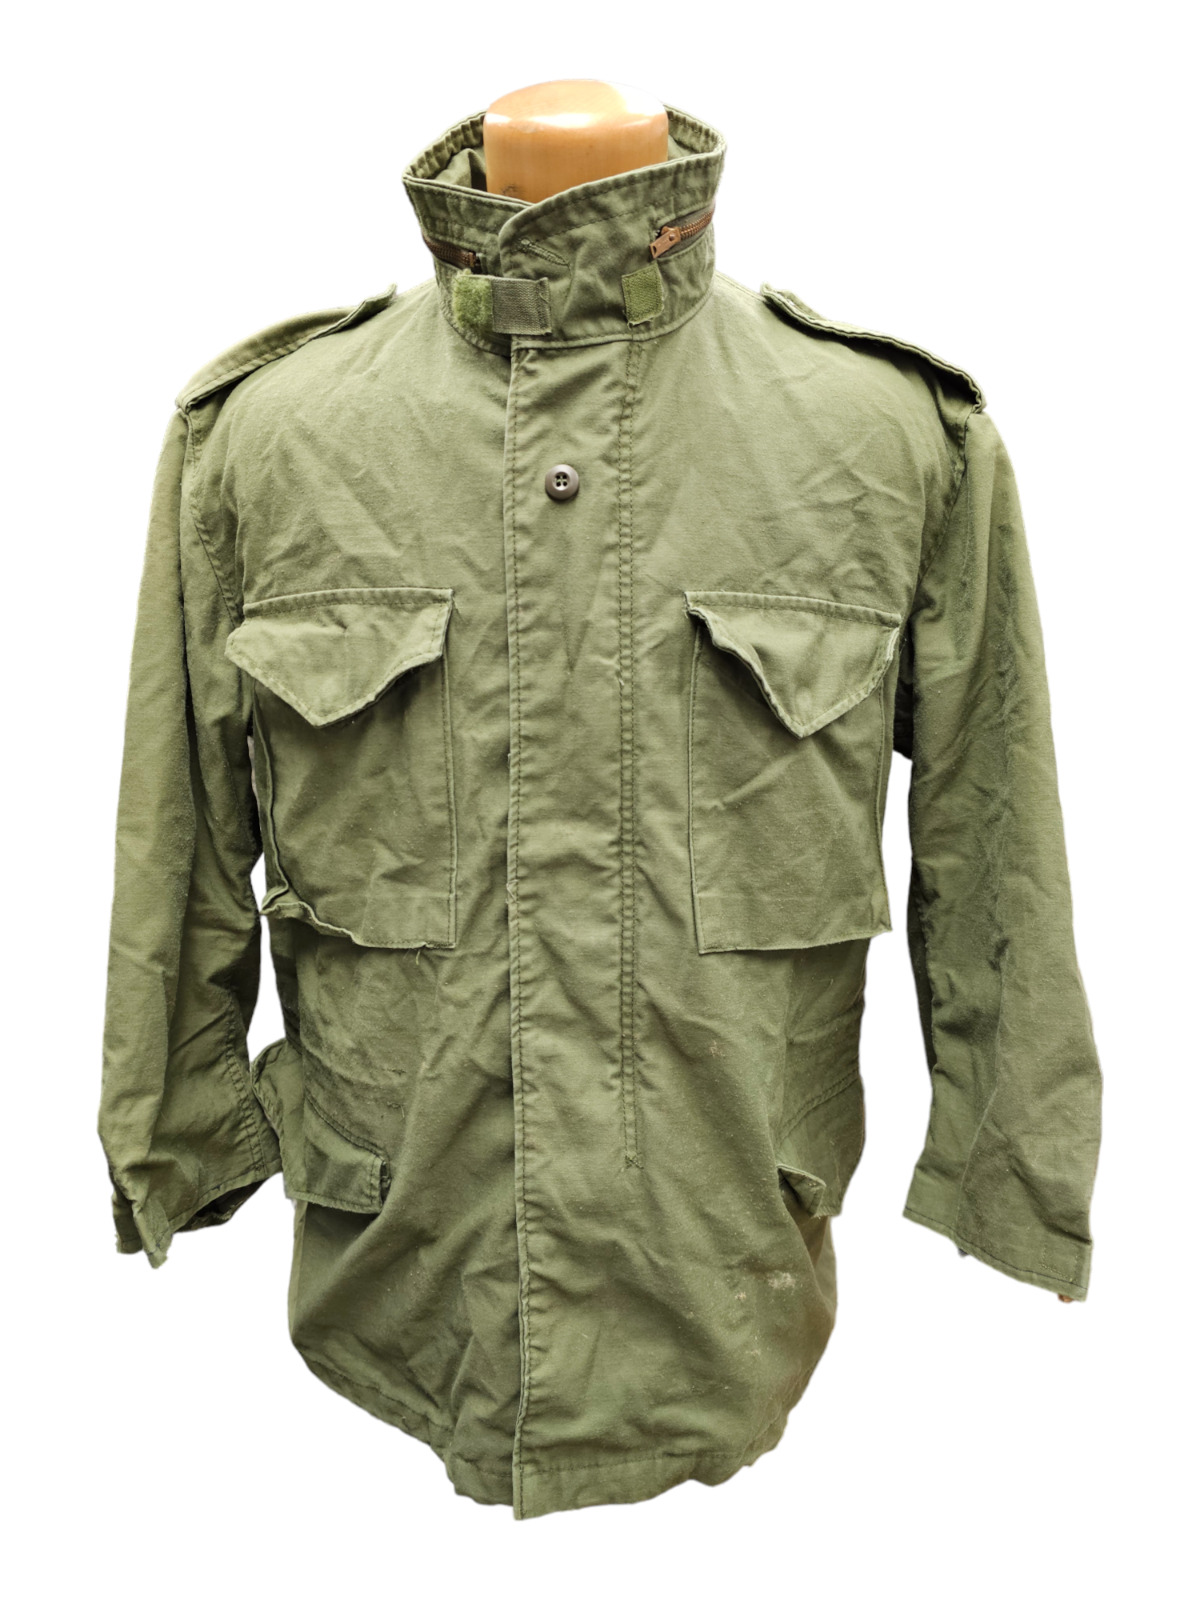 U.S. Armed Forces Alpha Industries M65 Field Jacket - Large